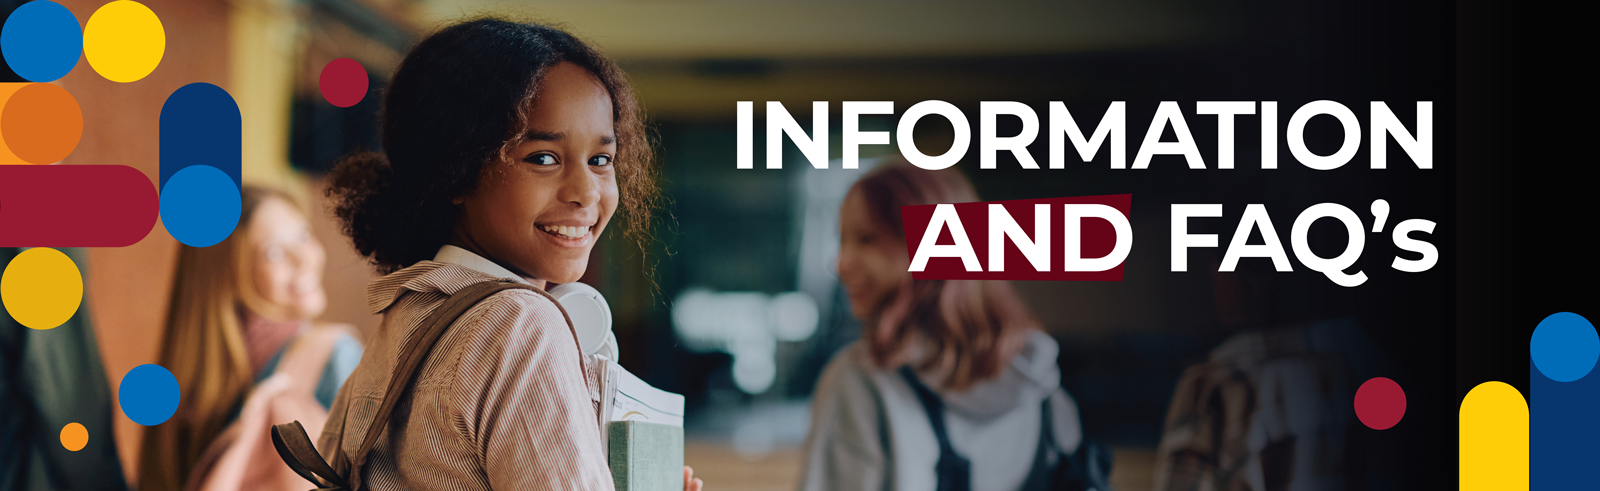 Information and FAQ's title with girl smiling and books in hand